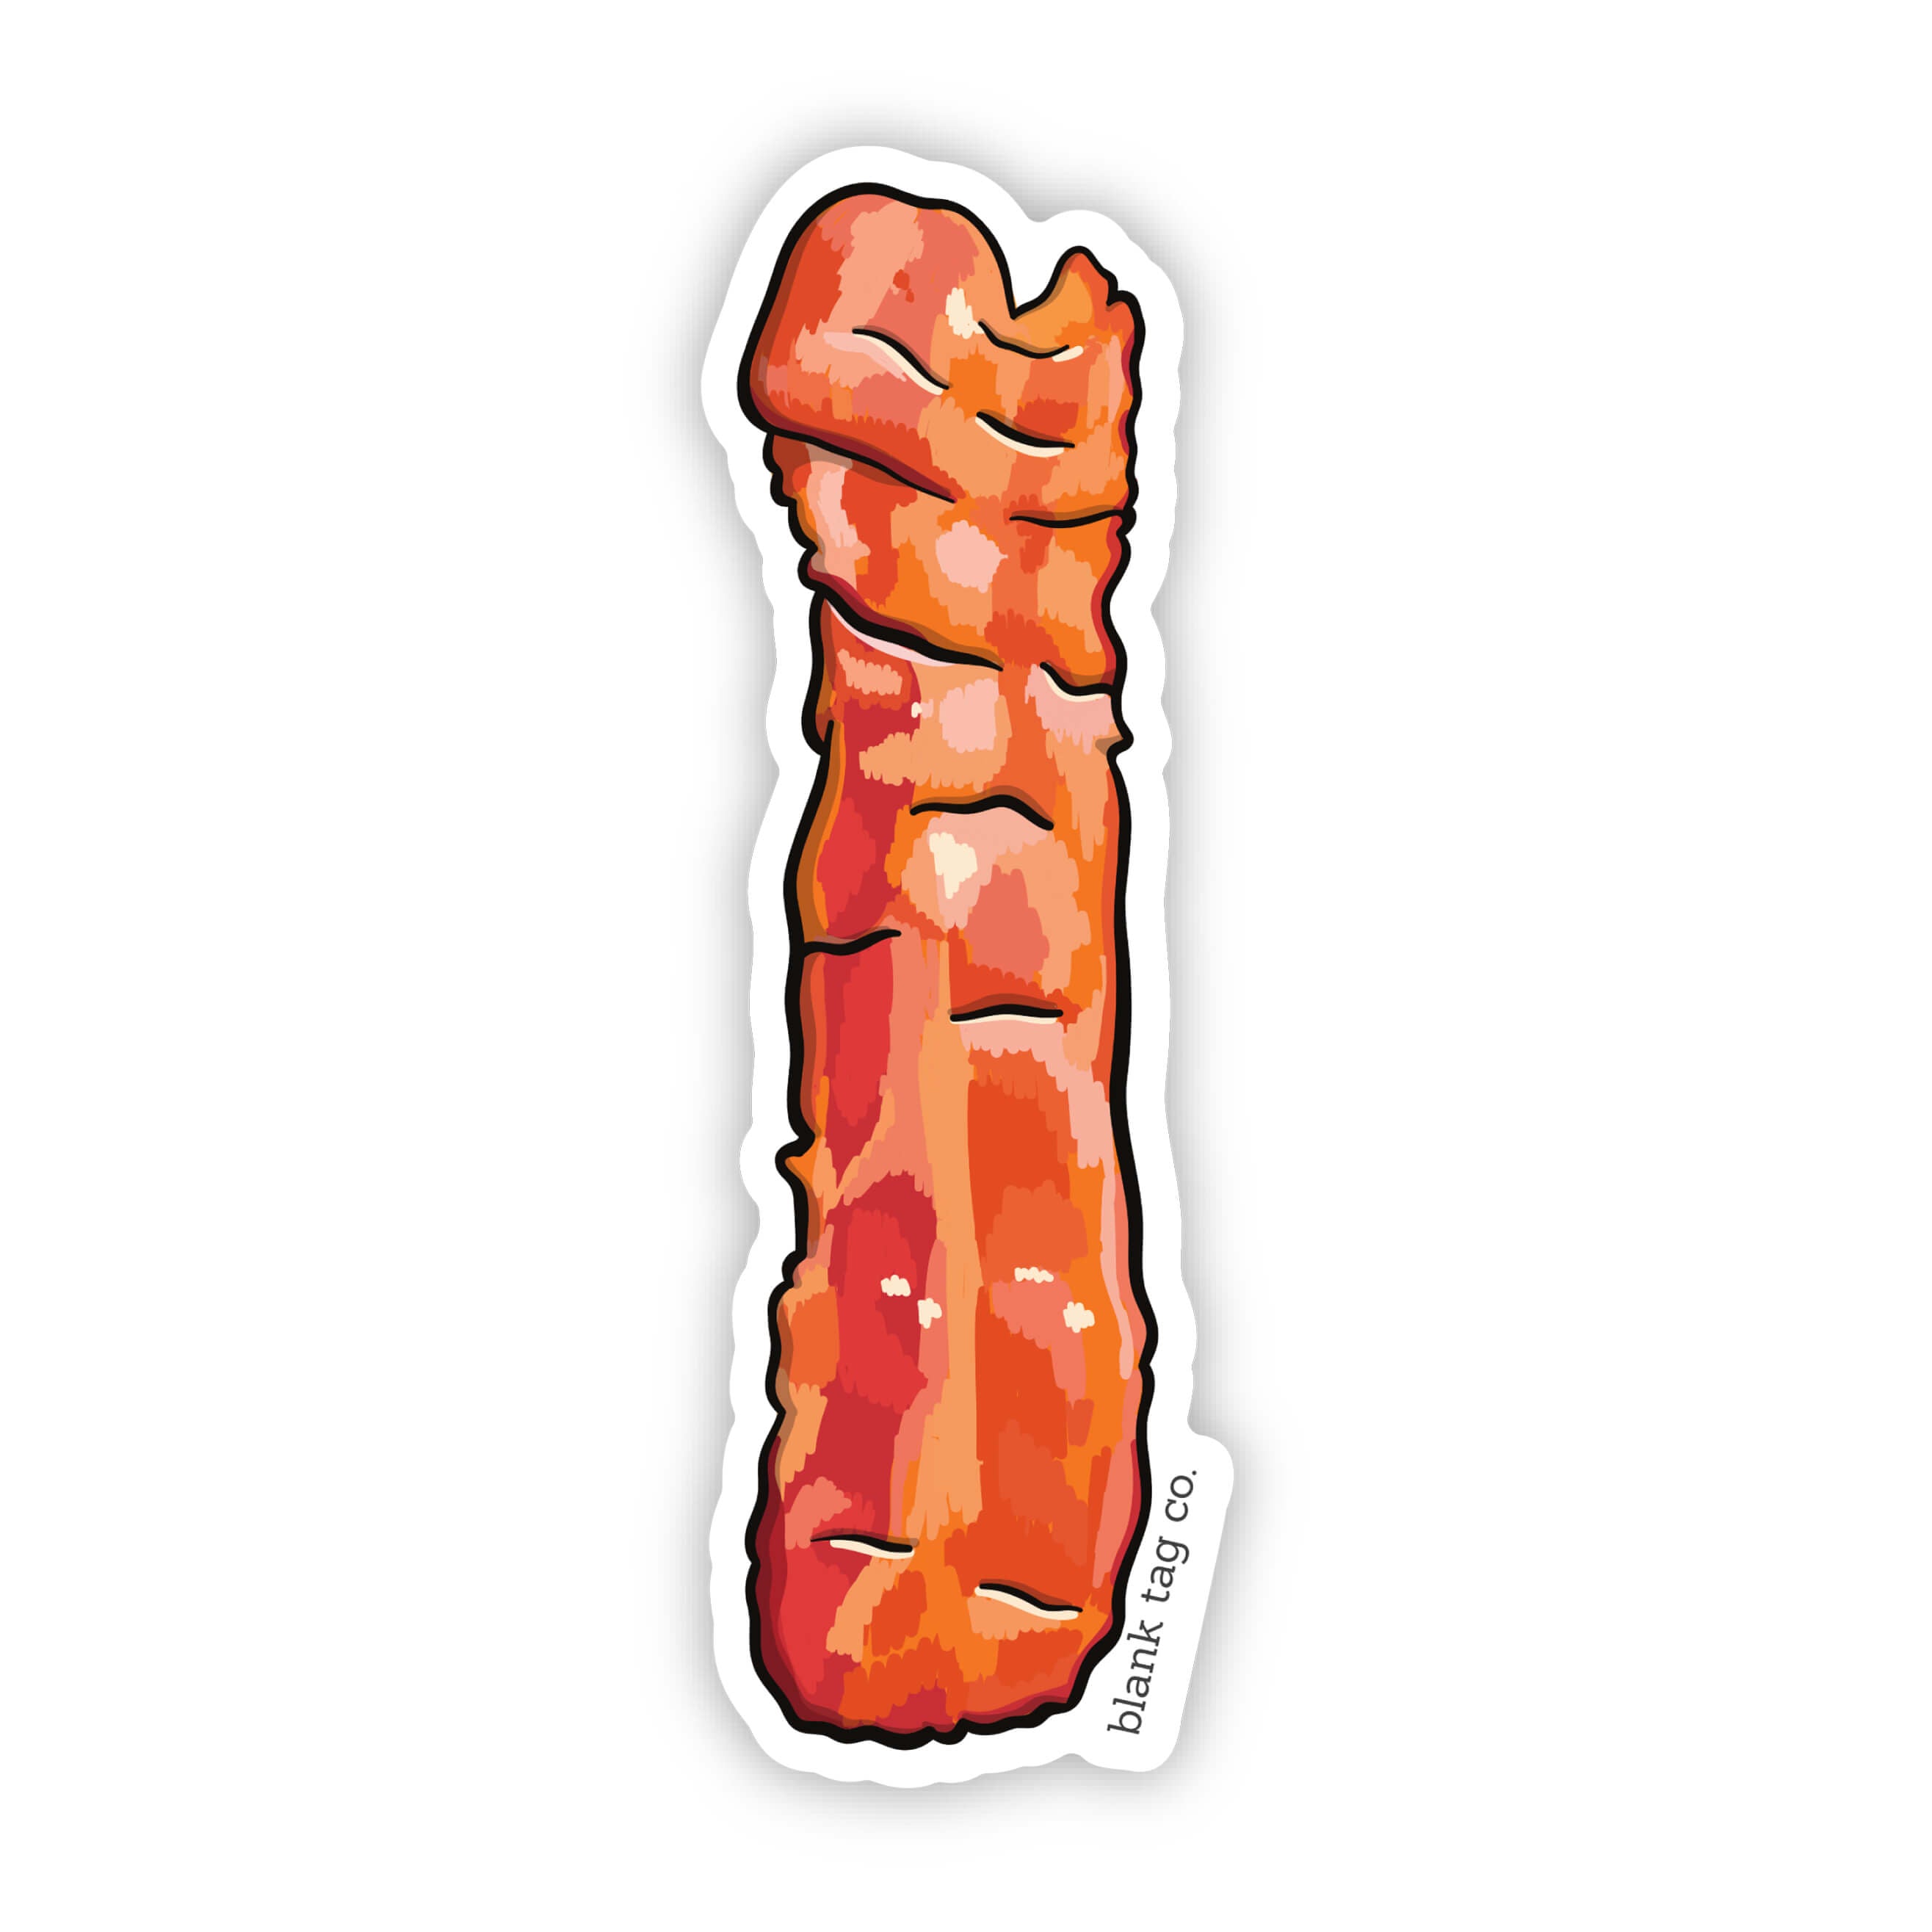 The Strip of Bacon Sticker